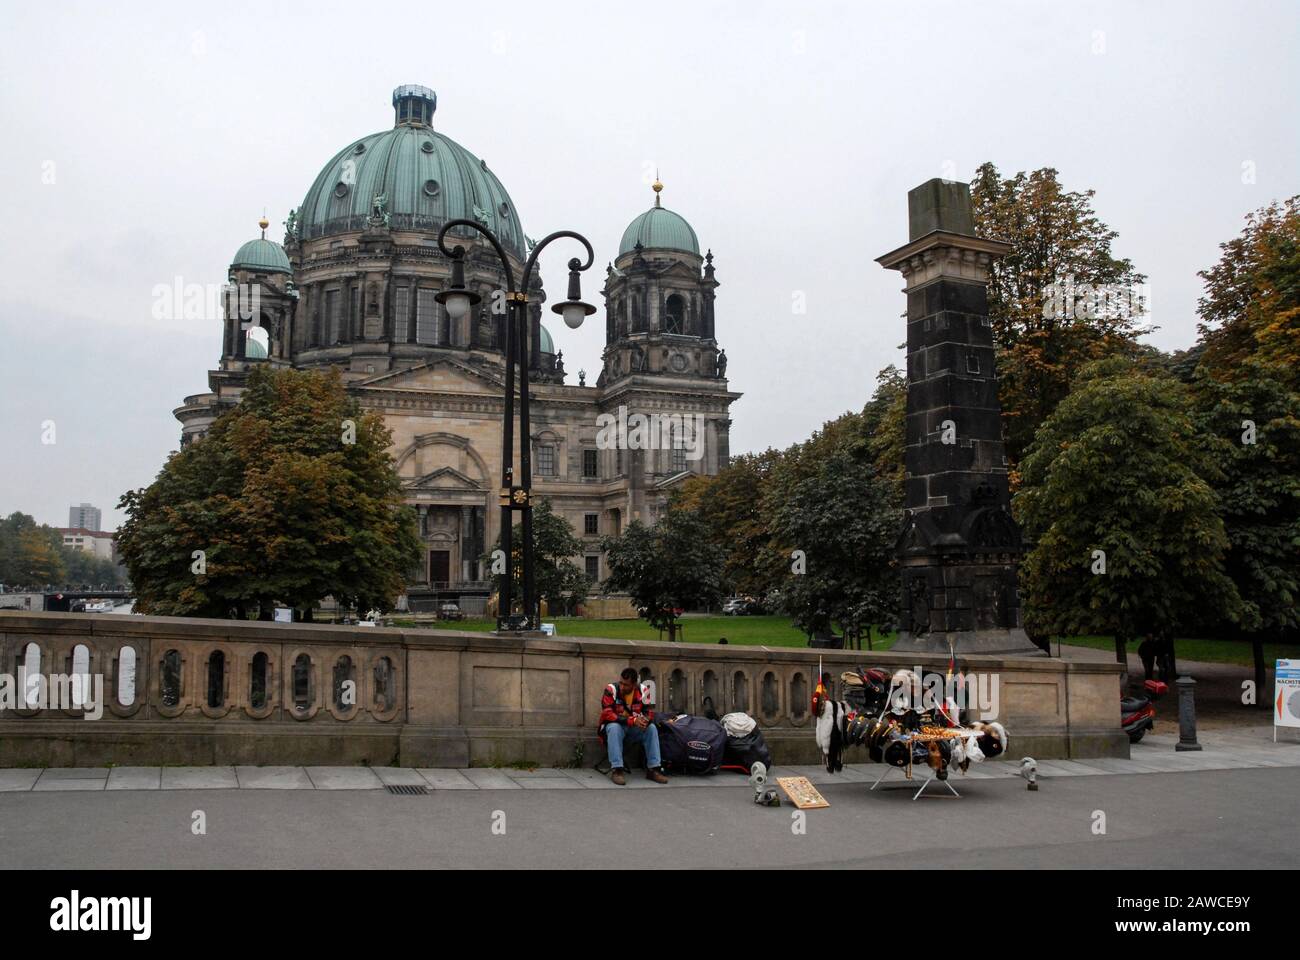 A street hawker with his East German and Russian military souvenir stall near the Berliner Dom (Berlin Cathedral)  on the banks of the River Spree in Stock Photo